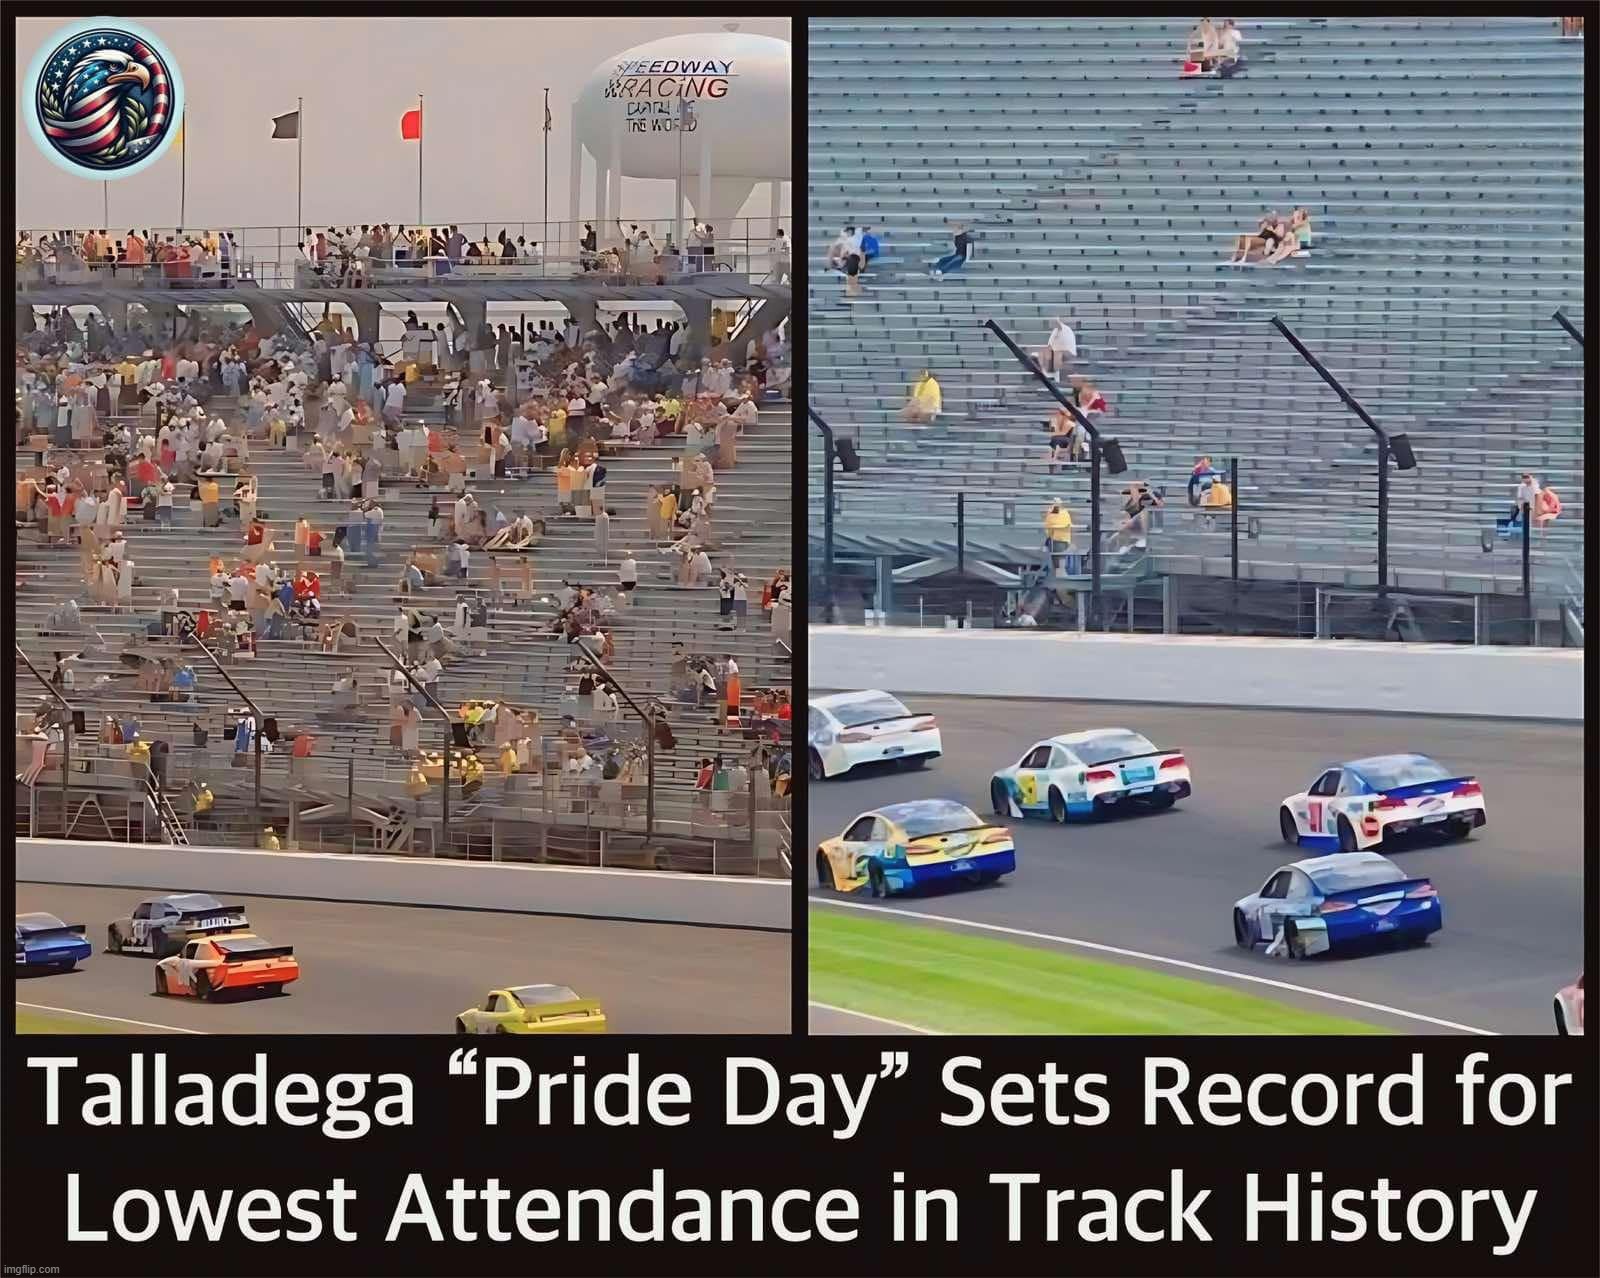 Talladega “Pride Day” Sets Record for Lowest Attendance in Track History | image tagged in talladega nights,talladega speeway,woke,lgbtq epic fail,let's go bully the queers,perverts | made w/ Imgflip meme maker